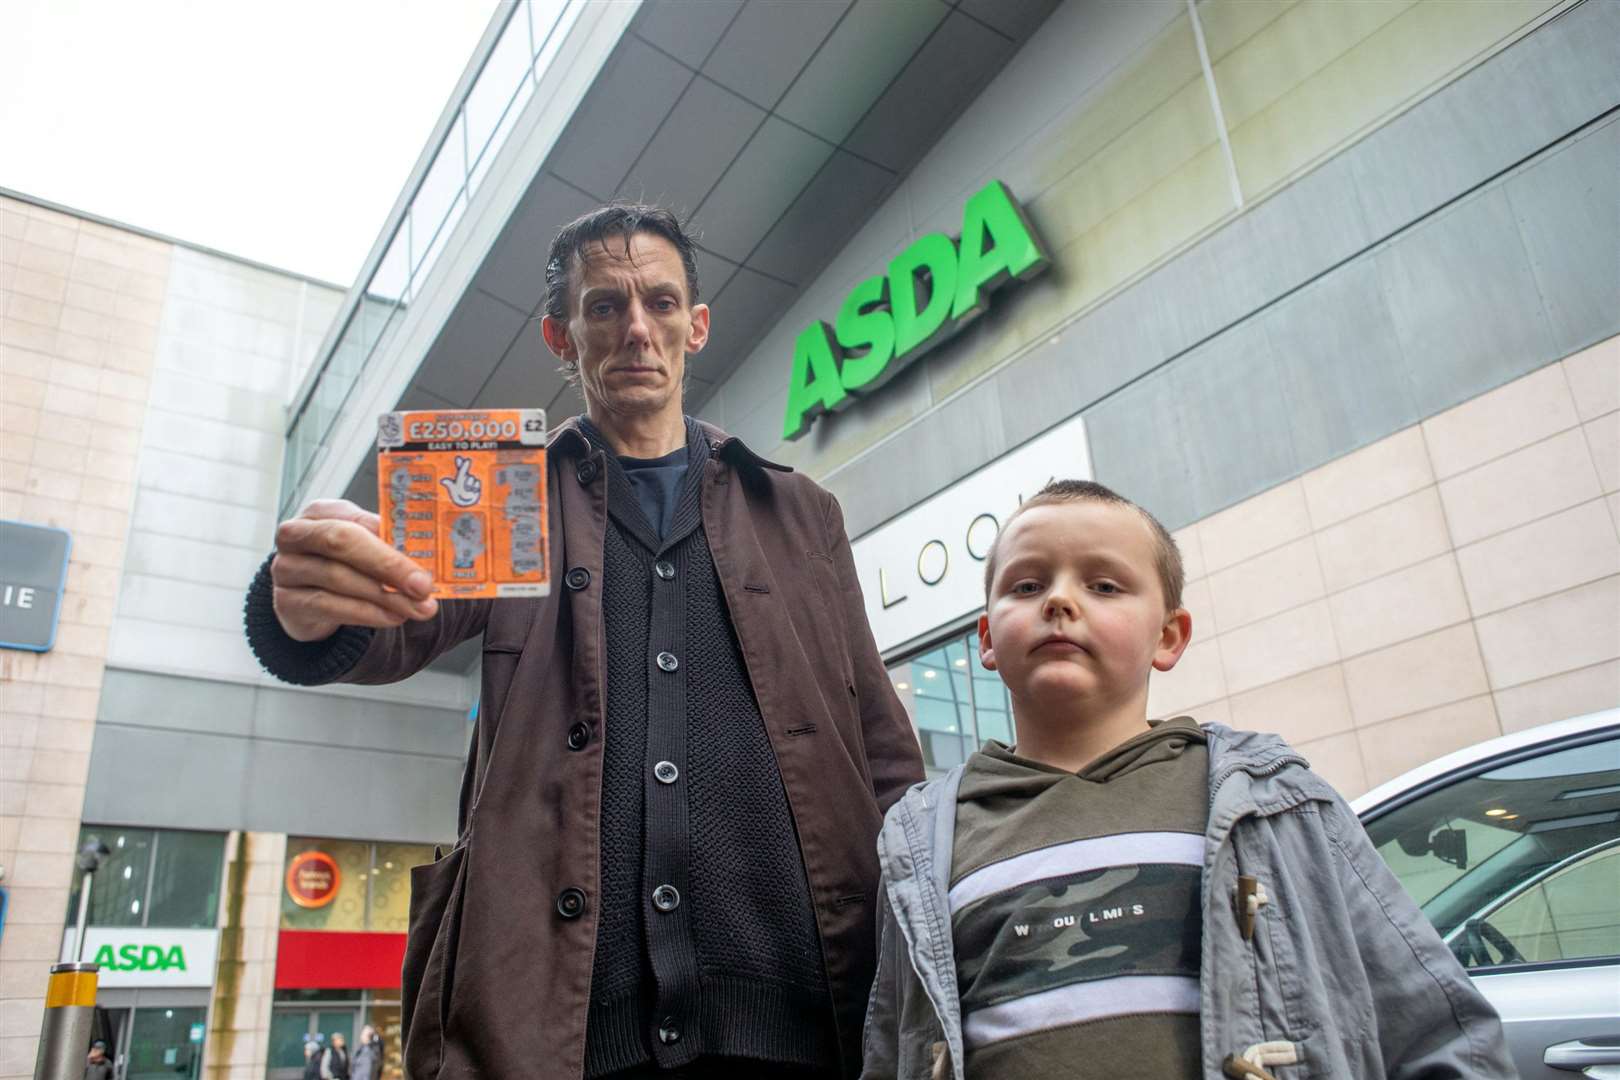 James Fletcher-Retallick, 47, said he was "shocked" son Ronnie, seven, was able to make the purchase. Picture: SWNS